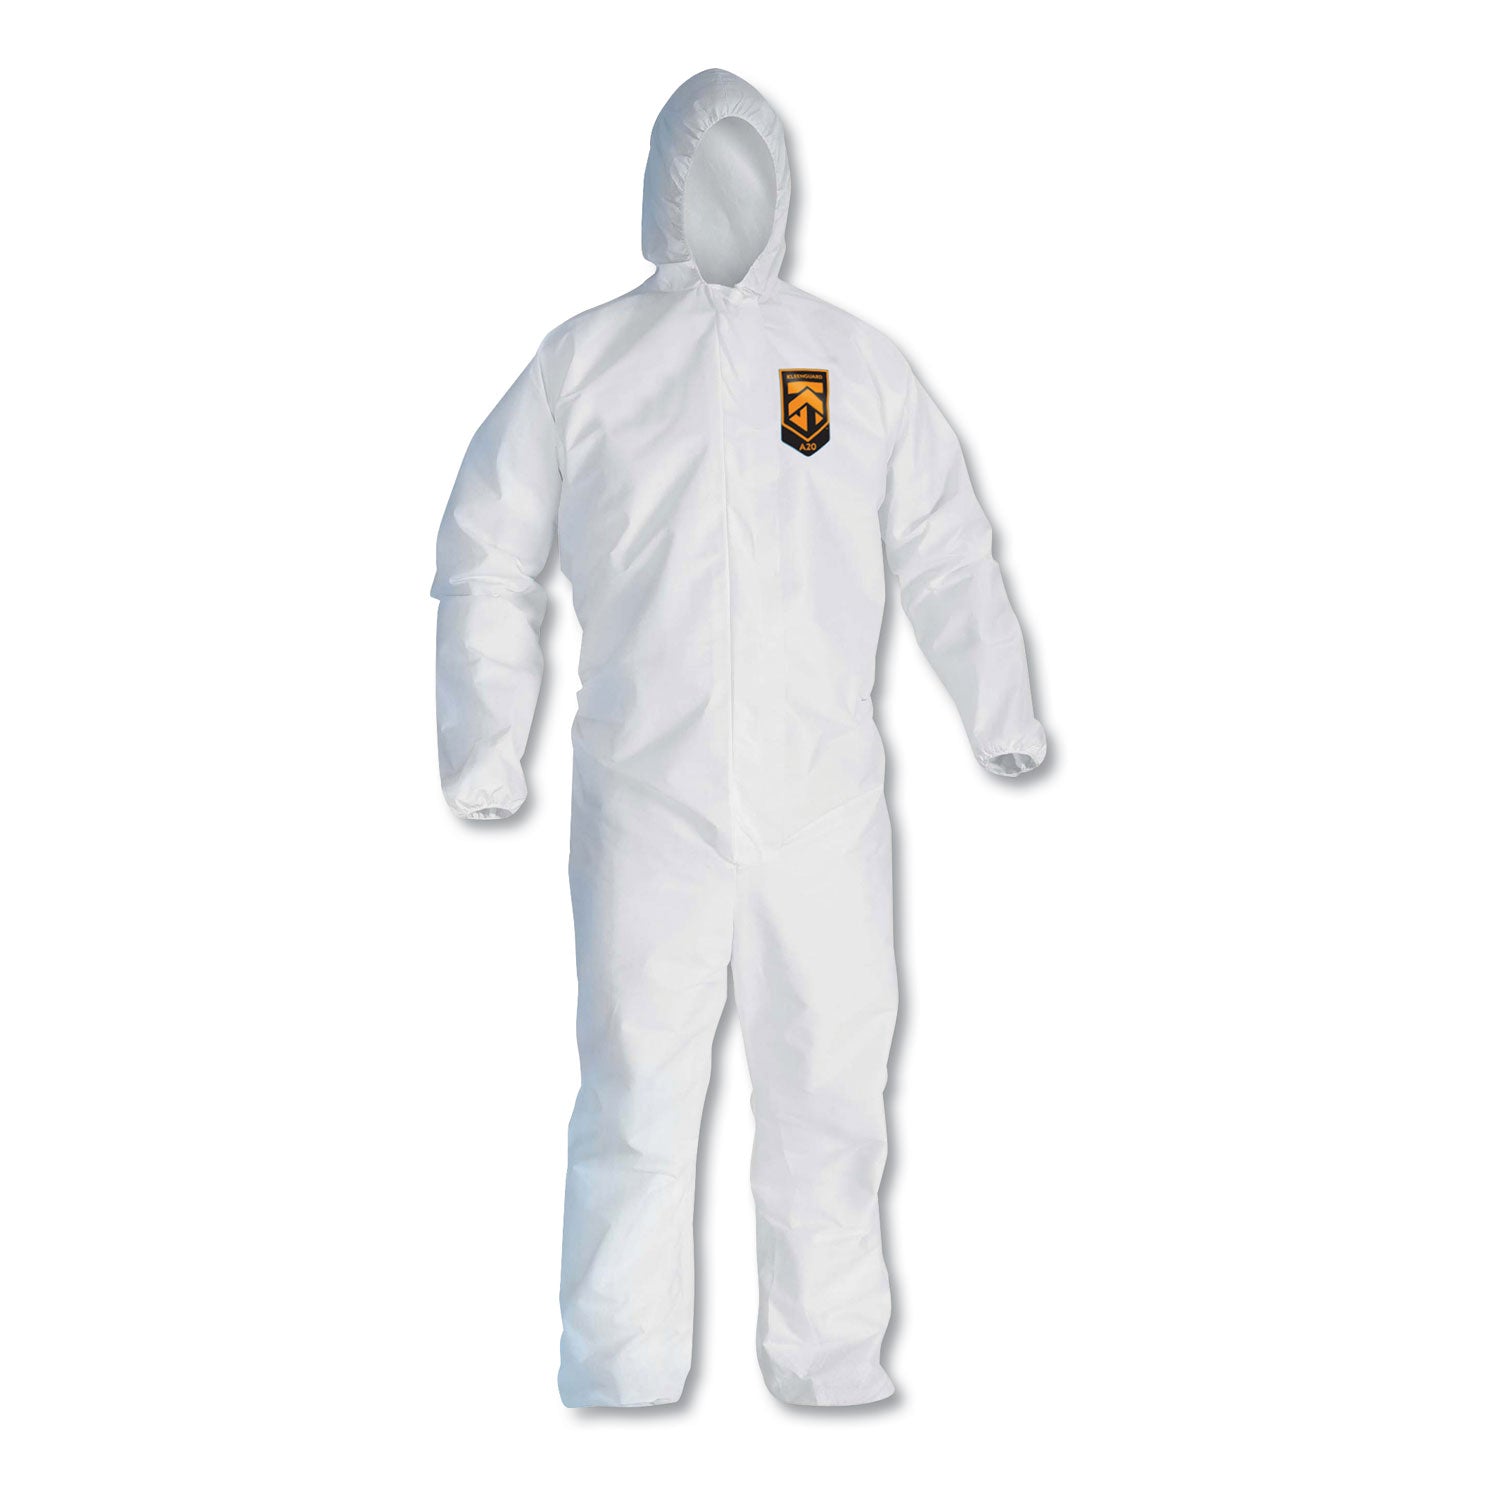 a20-breathable-particle-protection-coveralls-zip-closure-2x-large-white_kcc49115 - 1